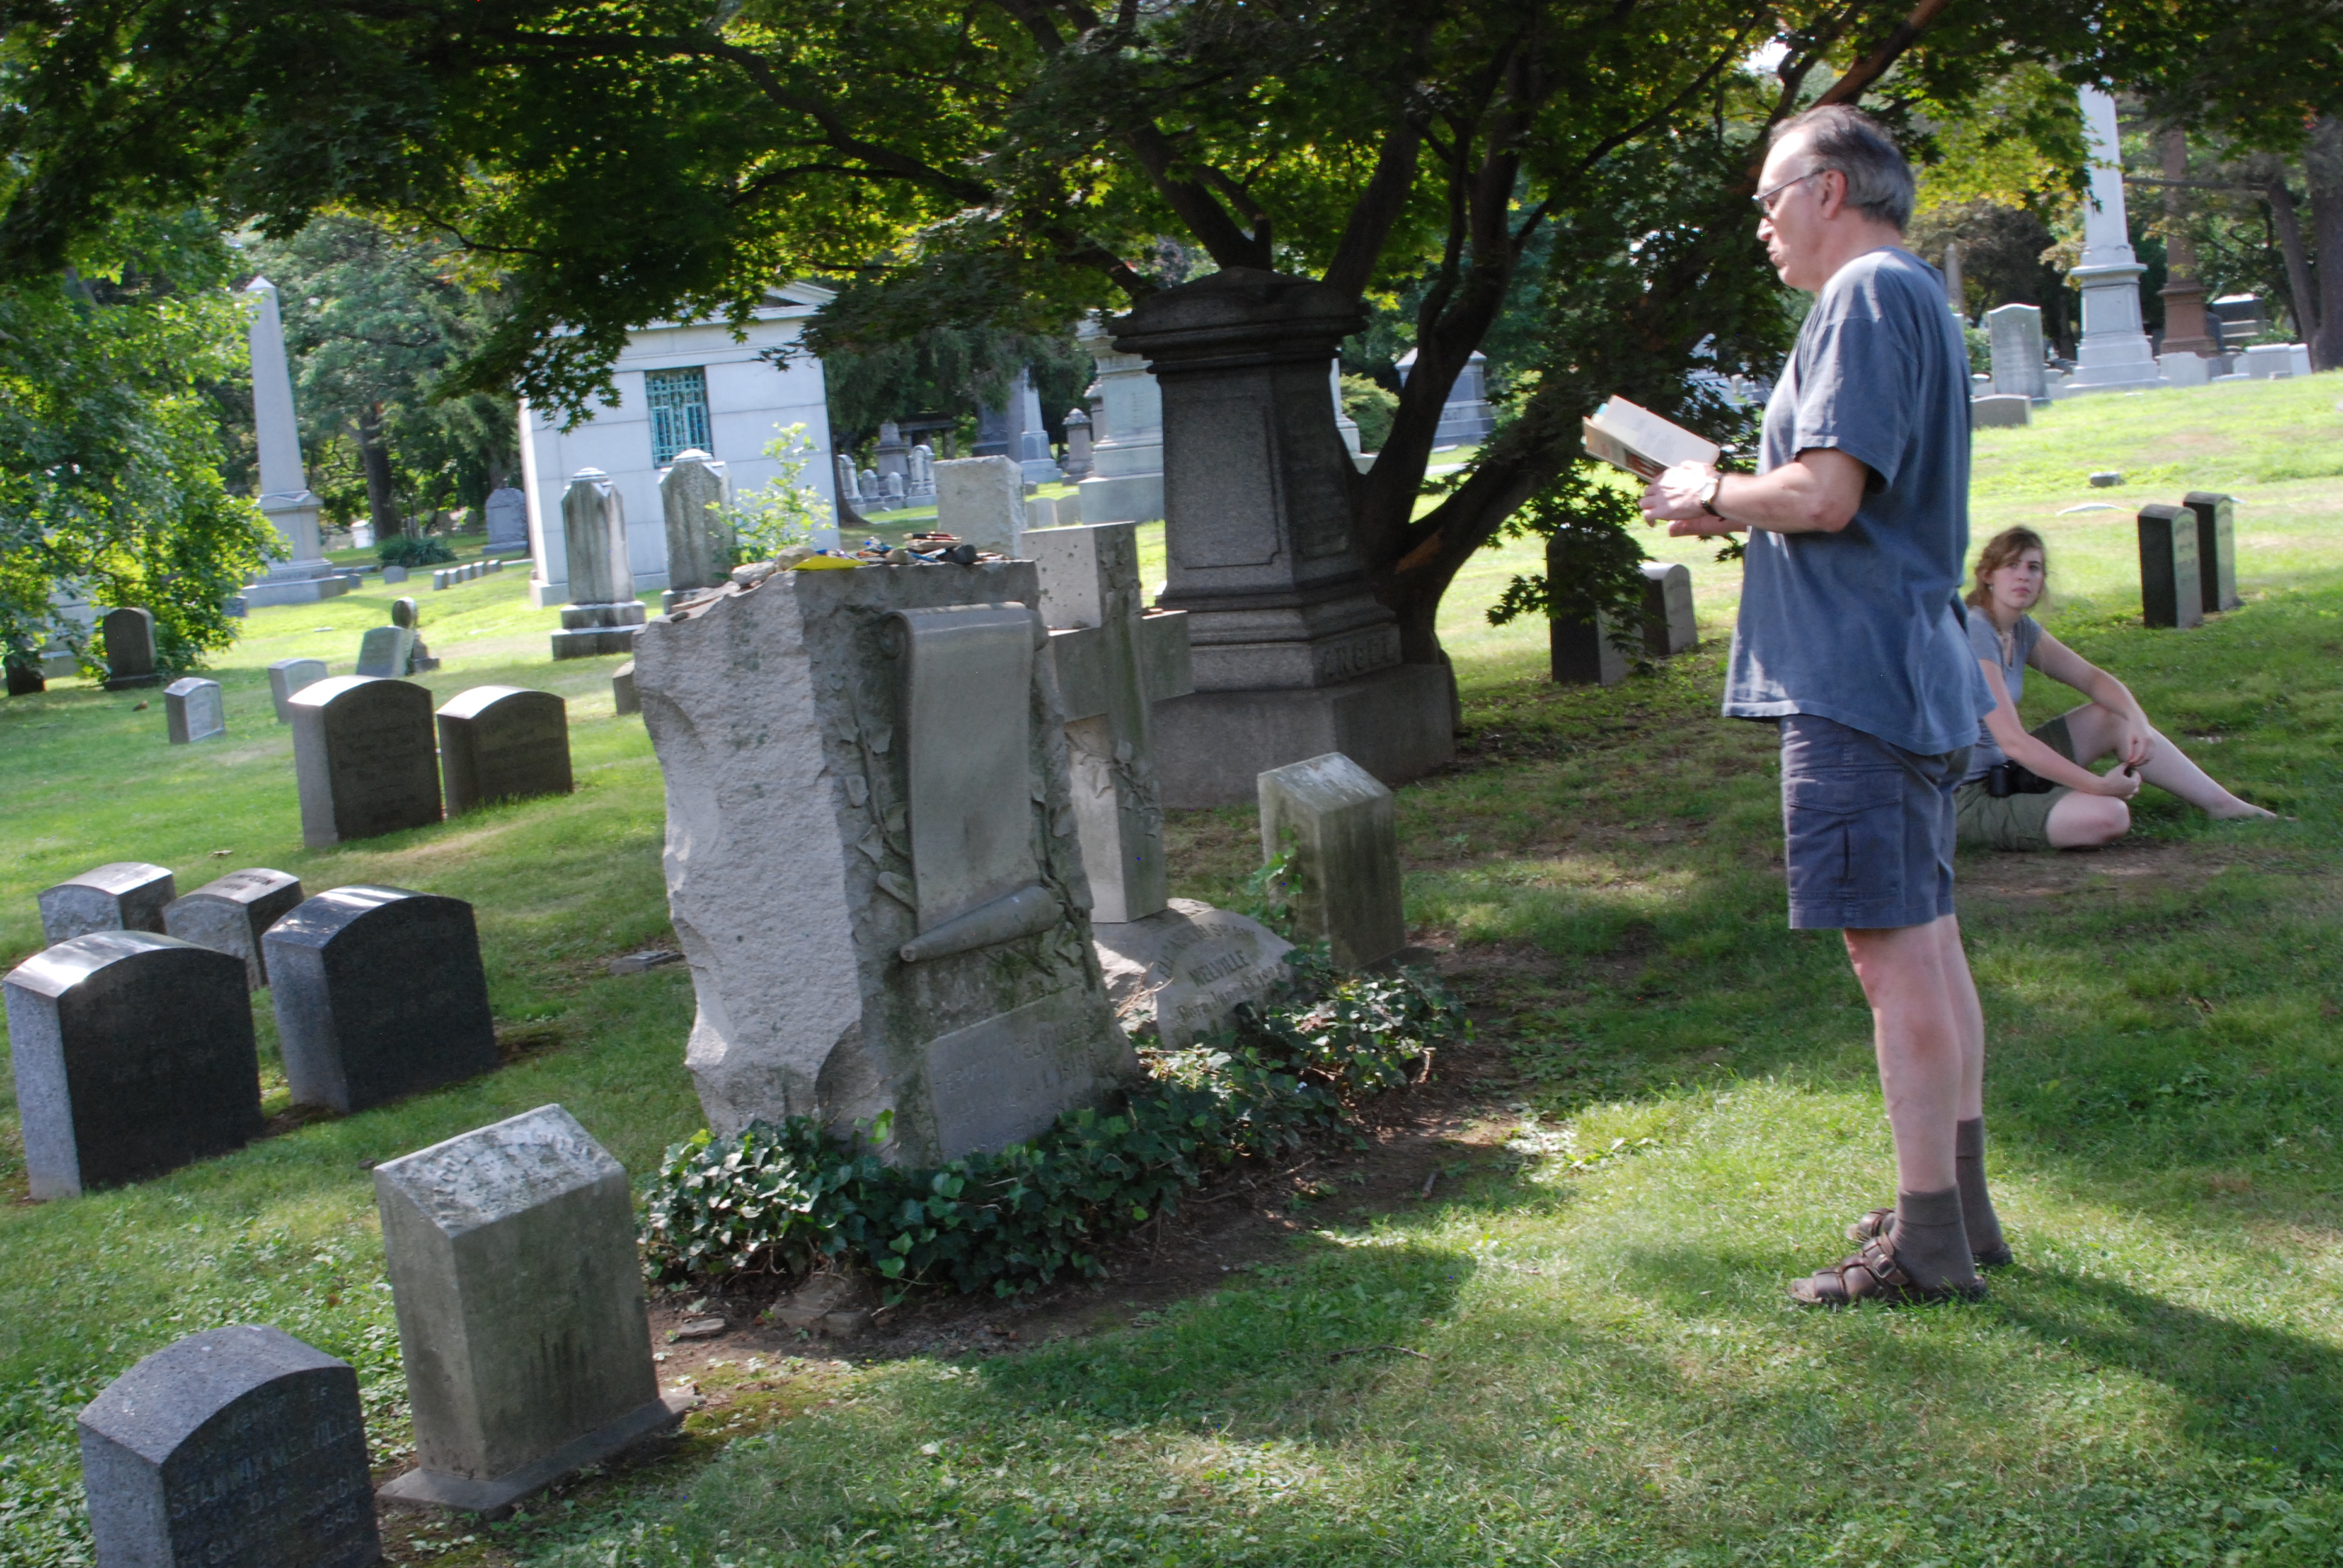 Kevin Lynch reads Hart Crane's "At Melville's Tomb" at Melville's tomb, Woodlawn Cemetery, The Bronx, New York, summer 2008. Photo: Katrin Talbot